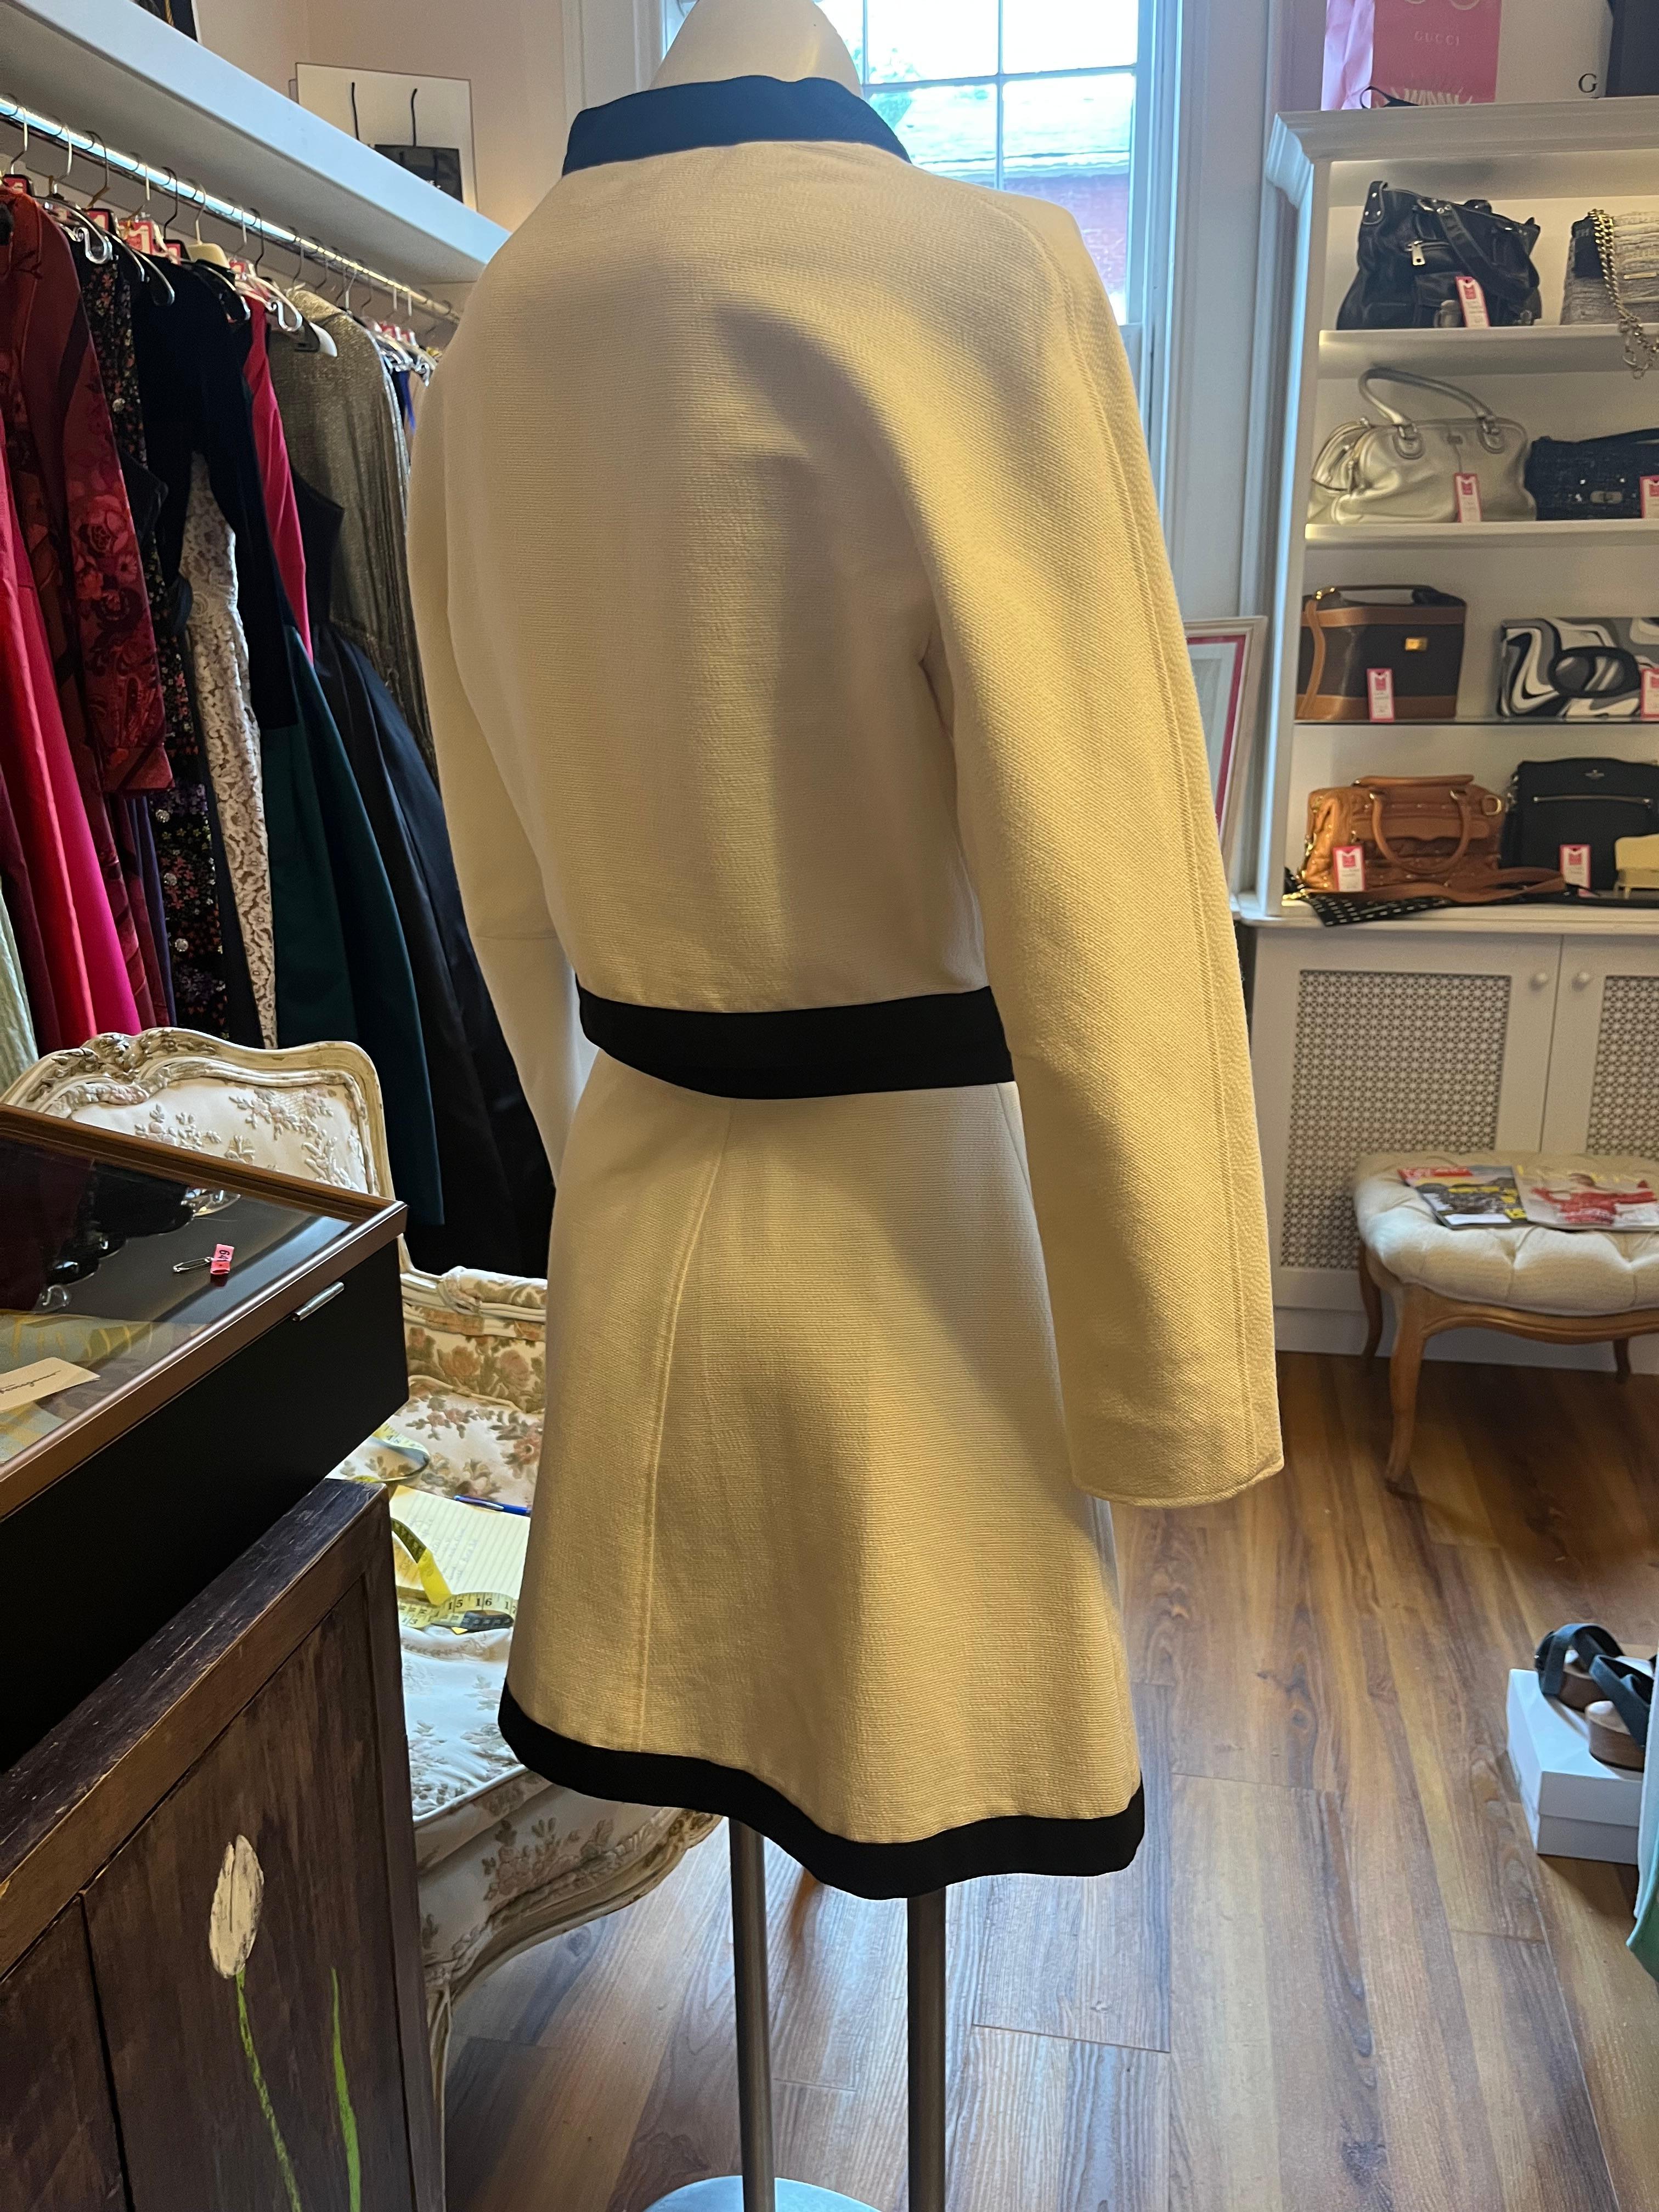 Designed by Avant Garde French Designer Andre Courreges, this white with black trim suit in cotton pique is a very good example of his work.
It is in wonderful condition for its age, and the style is still relevant today.
The jacket has a rounded